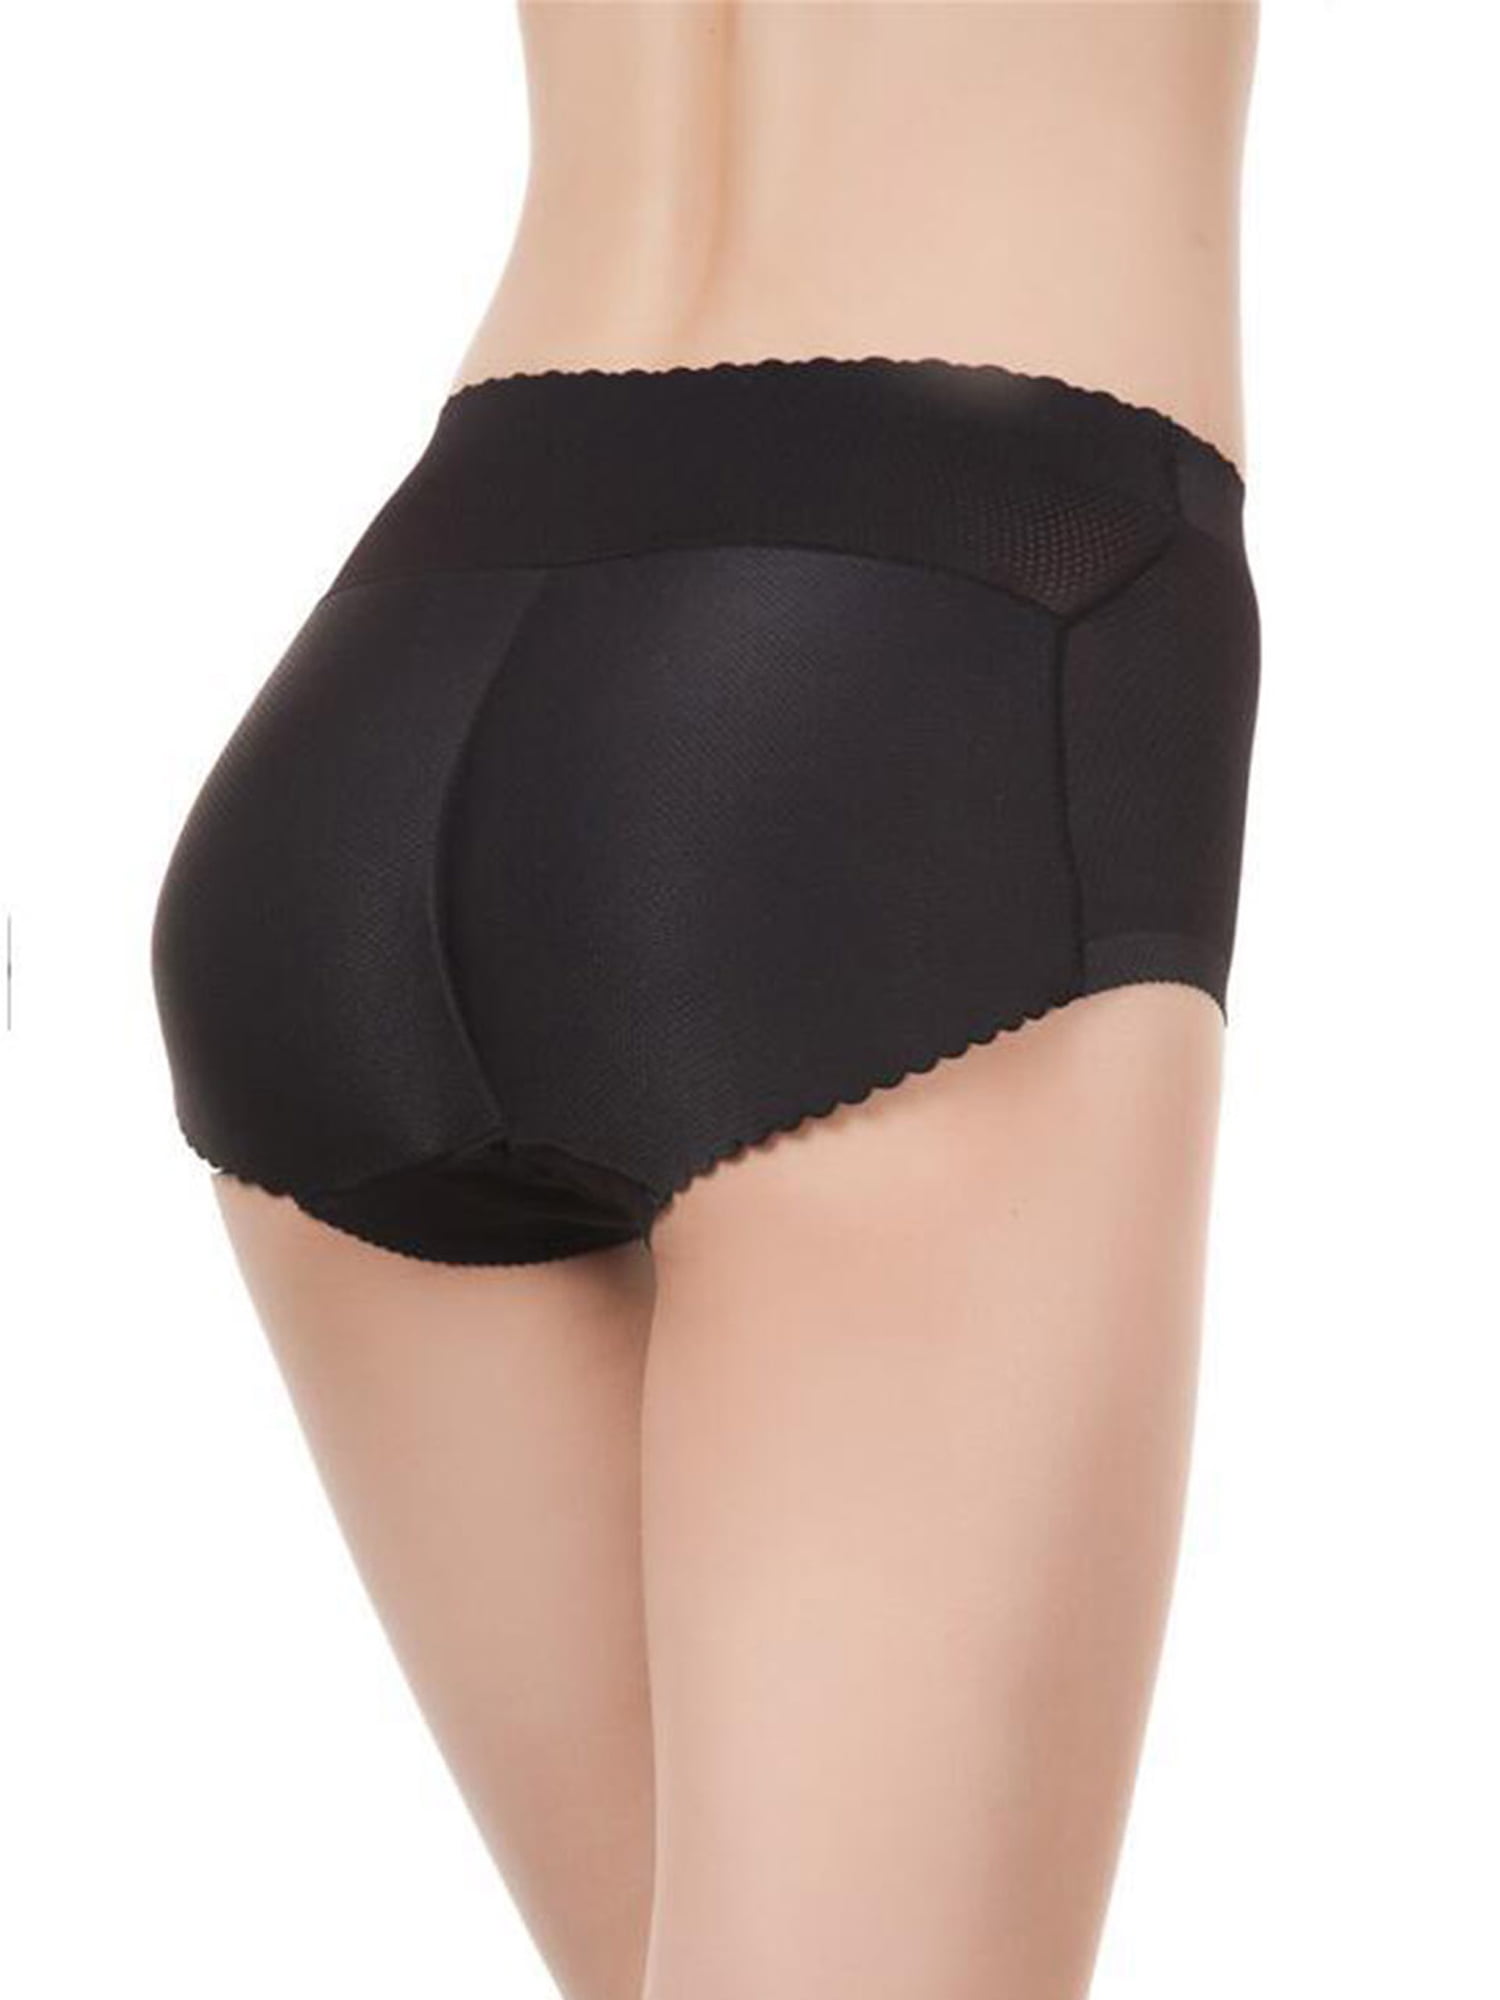 DODOING Women Lady Padded Panties Butt and Hip Enhancer Underwear Boy Shorts Panty